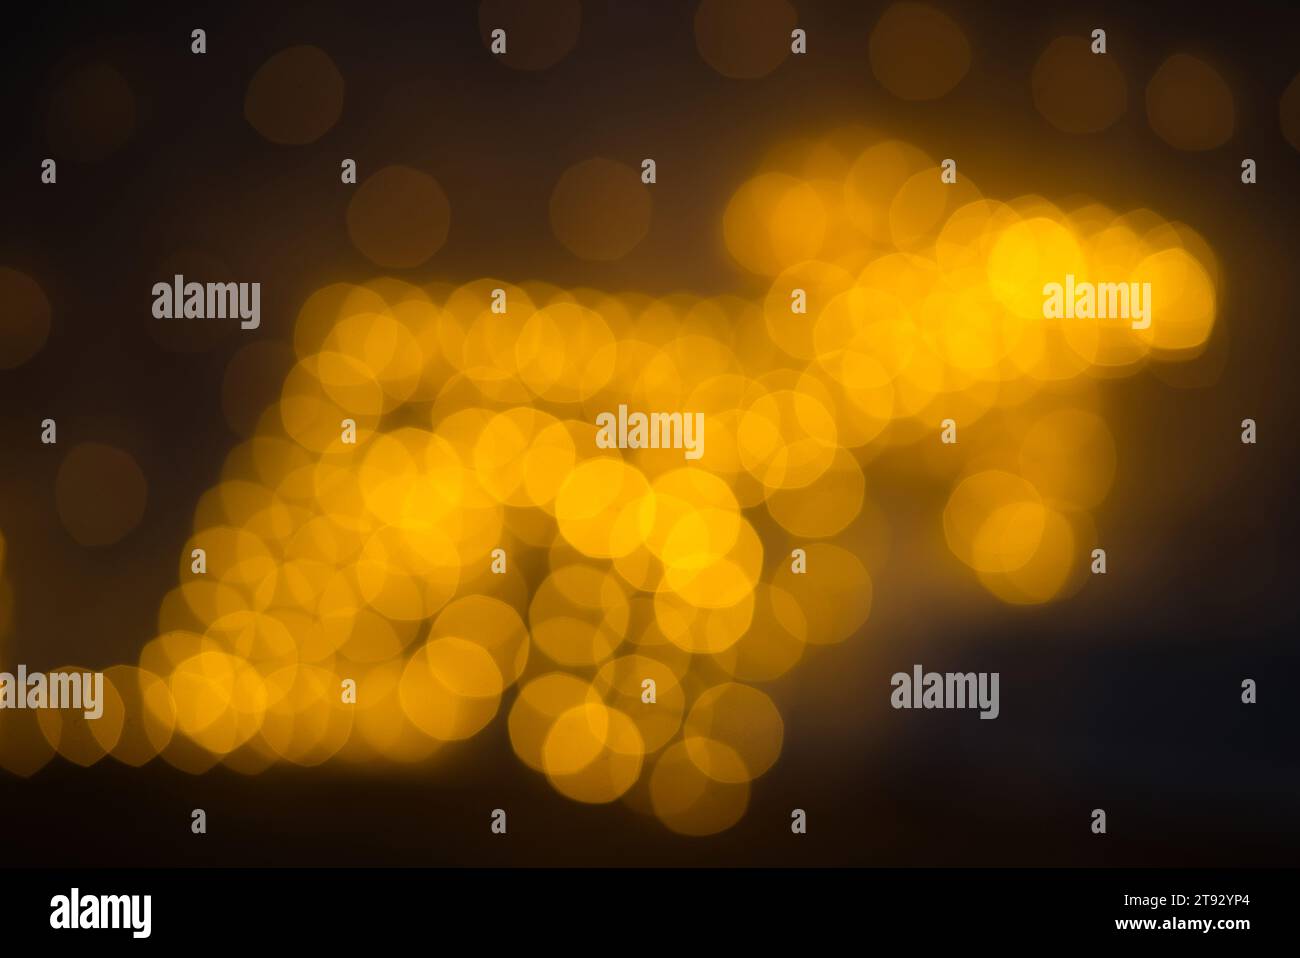 Experience the enchantment of this bokeh captured with a 75mm lens, forming a reindeer shape from closely packed glowing yellow ovals and nonagons. Th Stock Photo